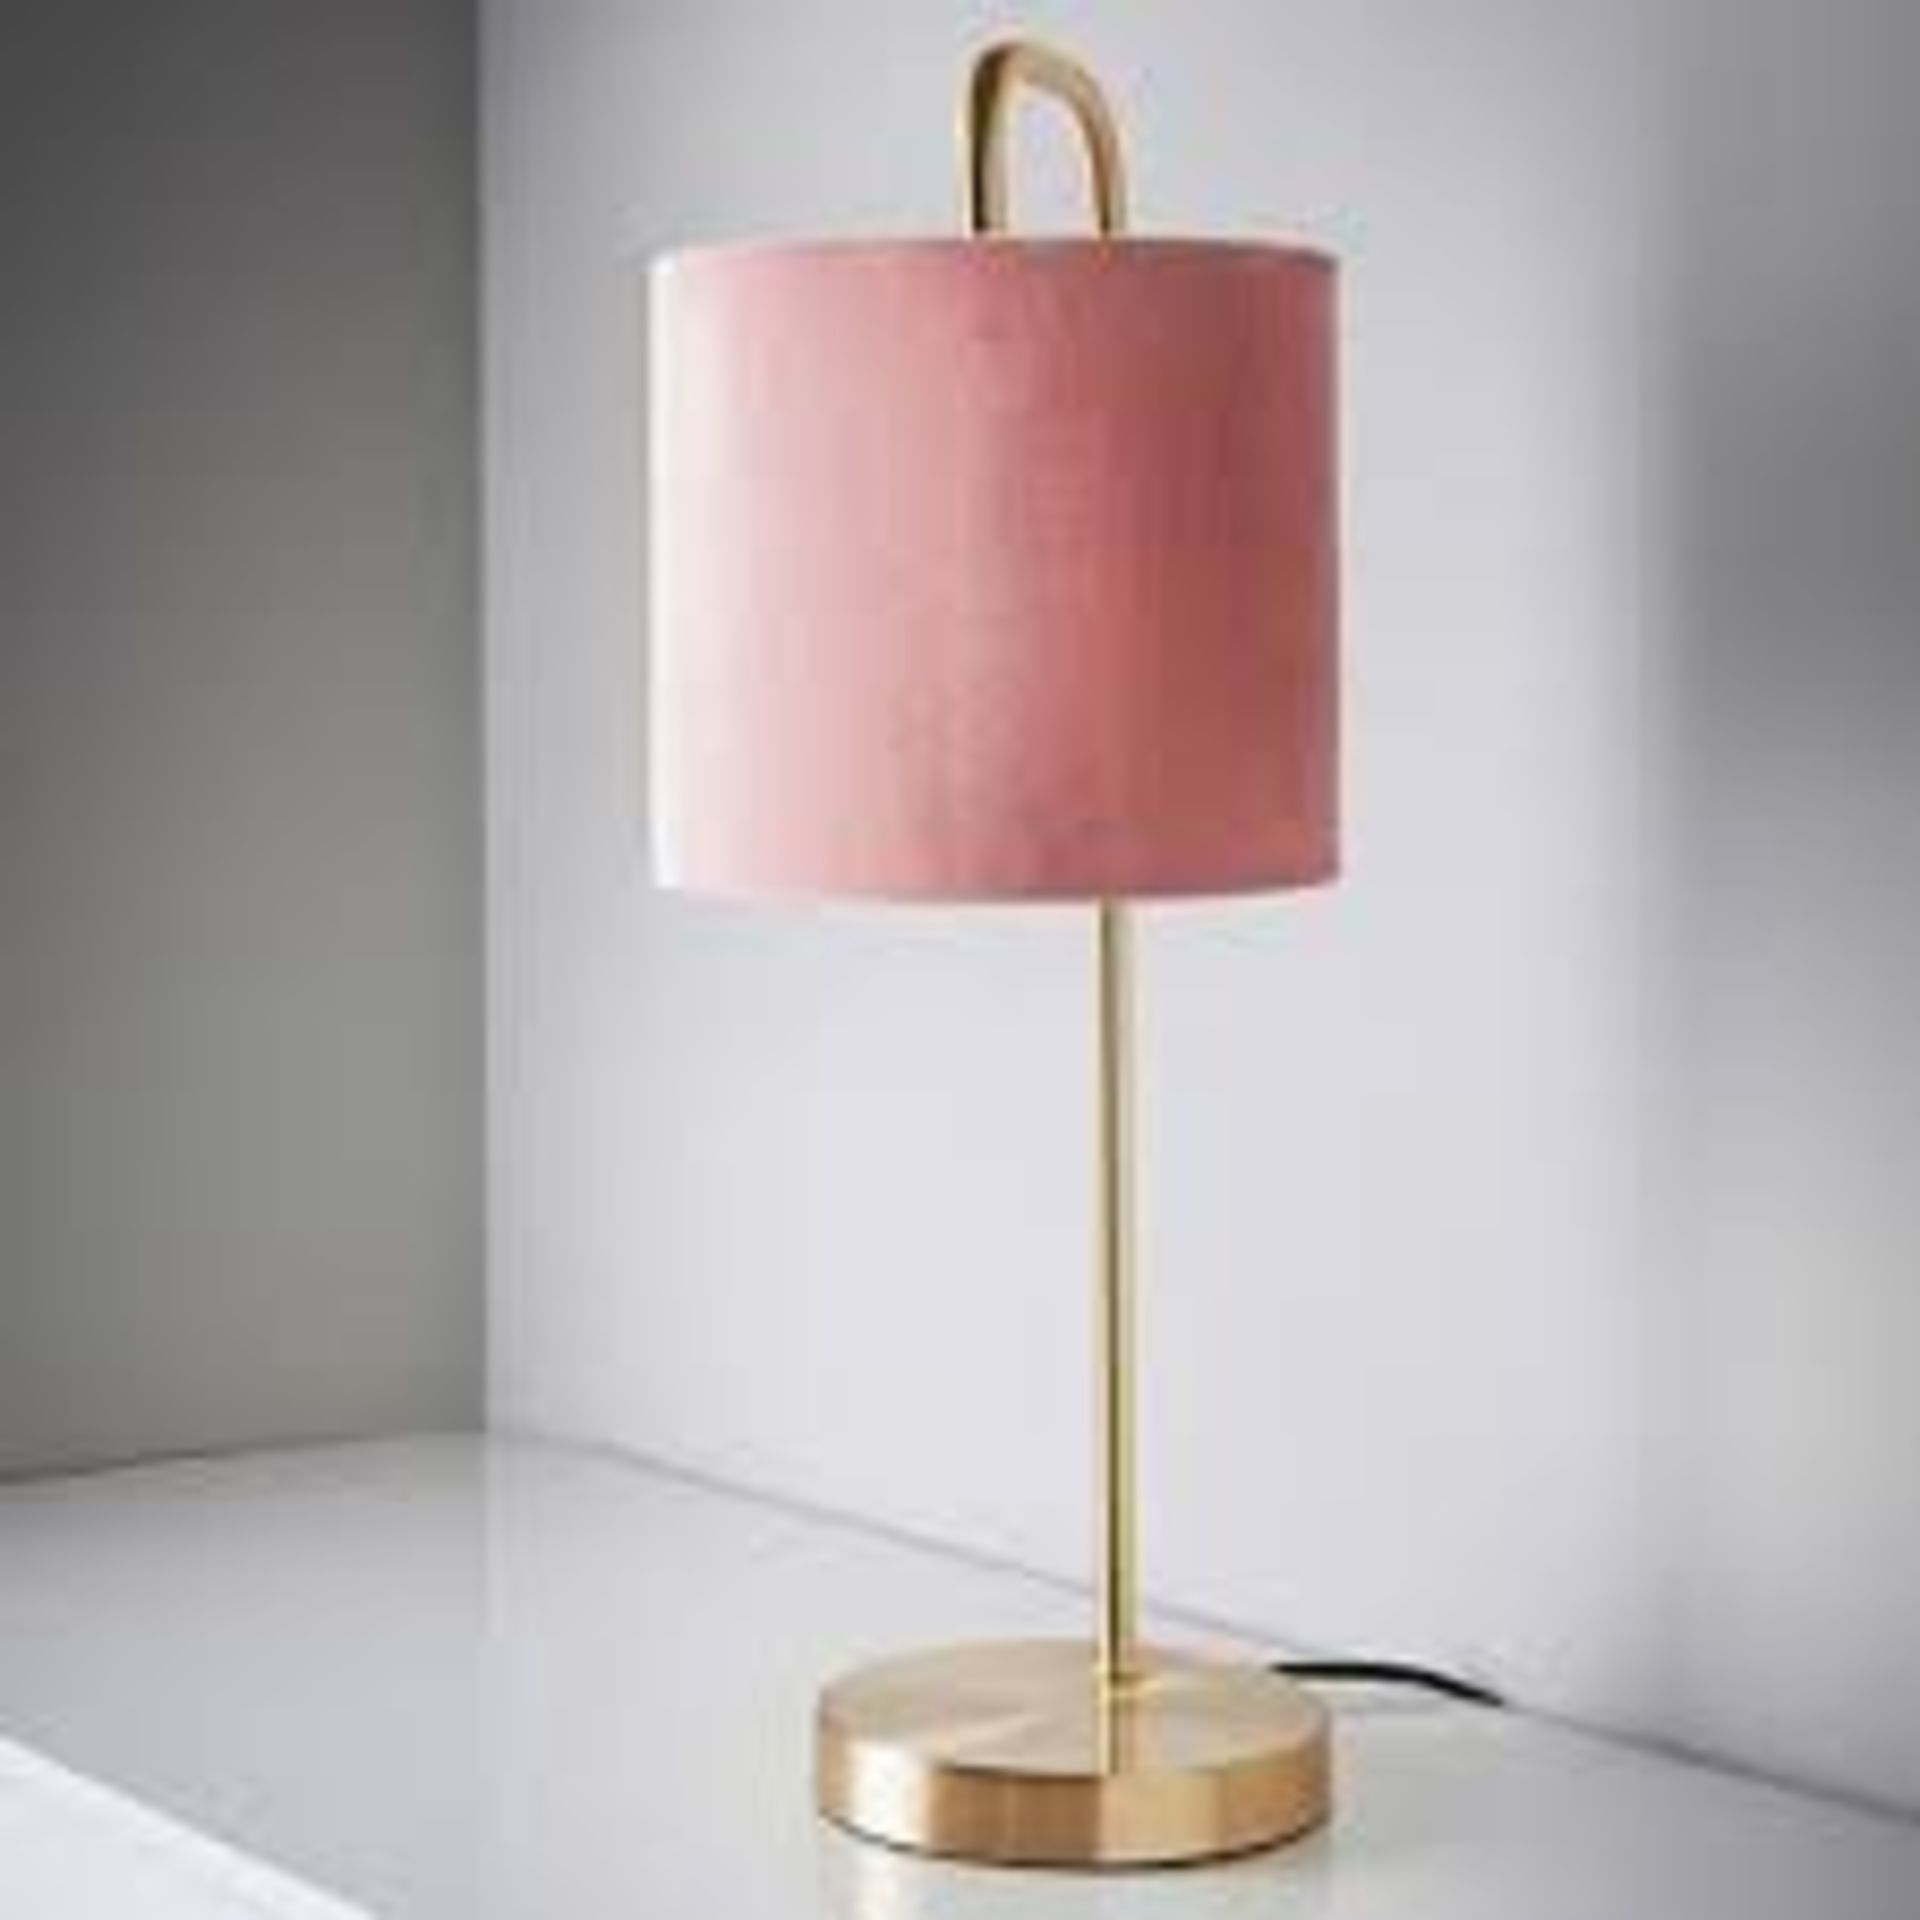 TRADE LOT 12 x NEW BOXED LUXURY GOLD TABLE LAMP WITH BLUSH SHADE (700967ROW5/6)